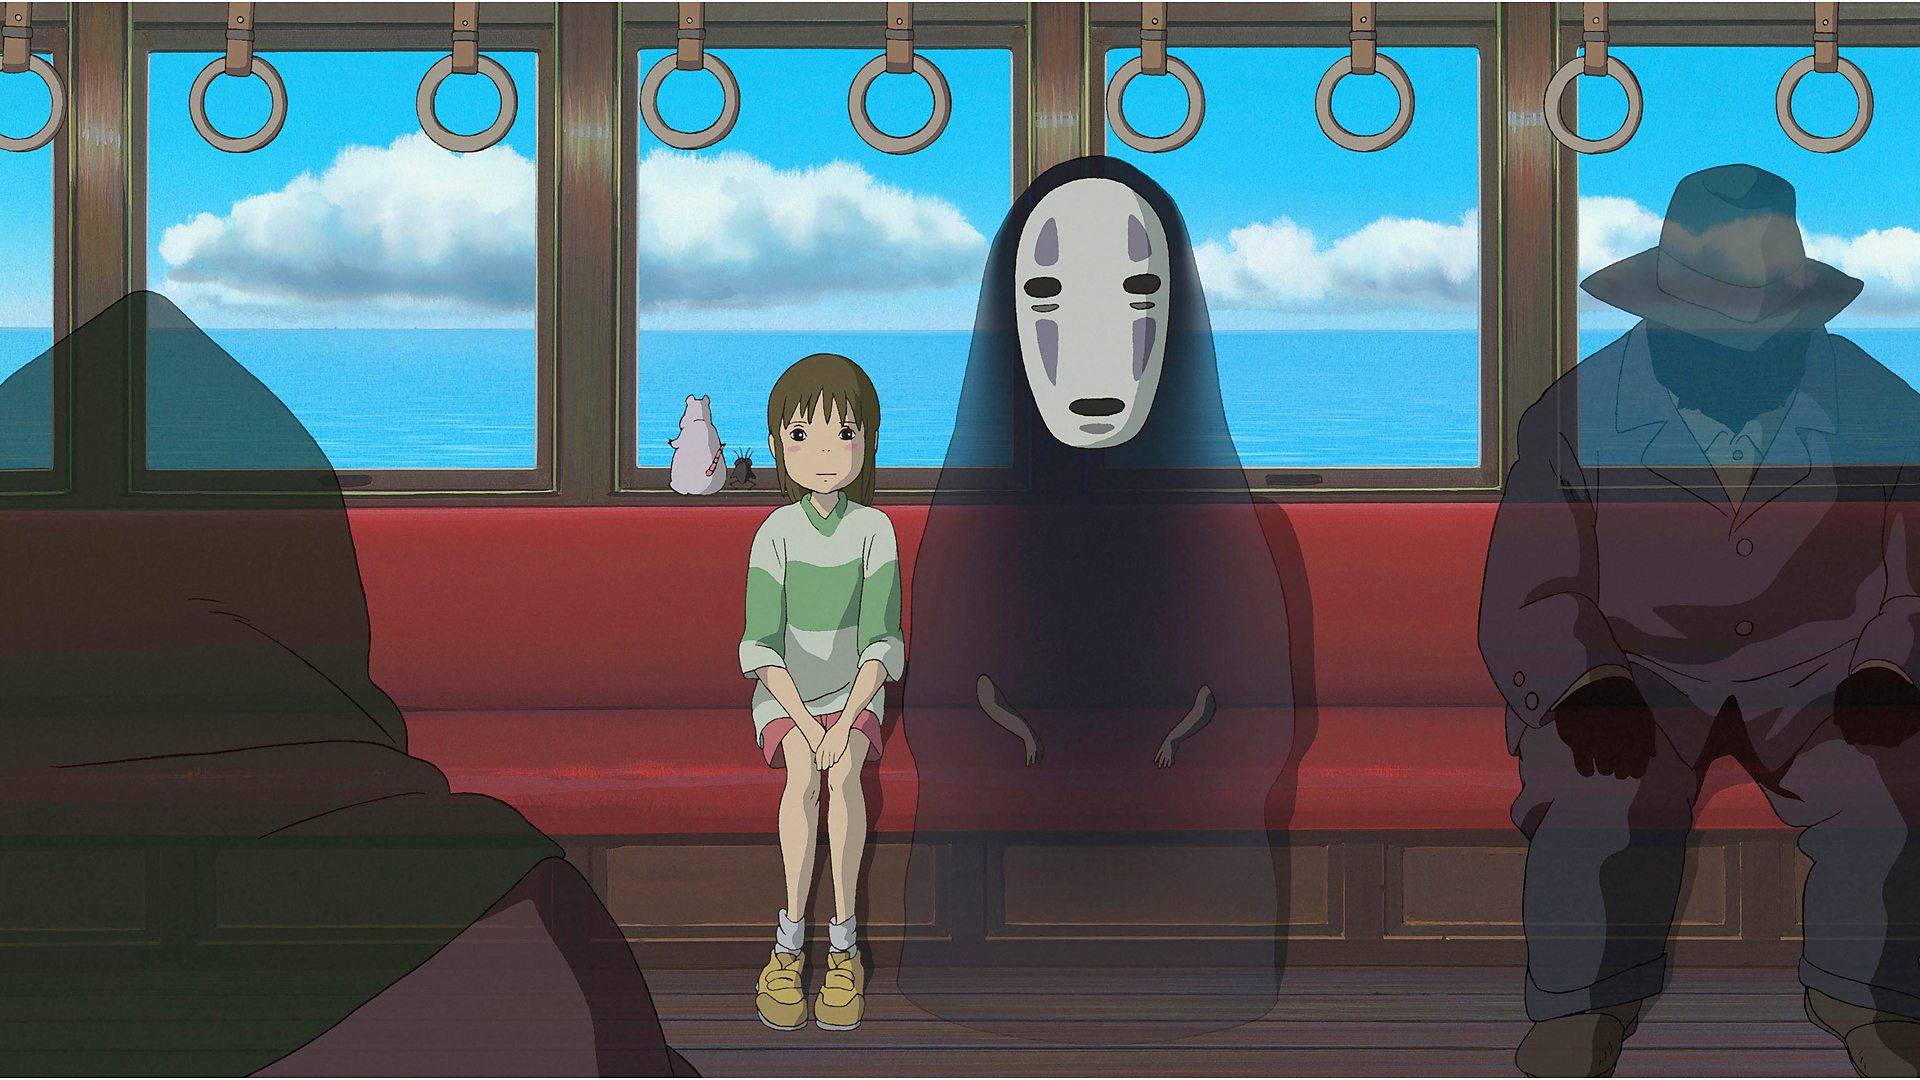 Studio Ghibli movies: How to watch, what to know, and meanings